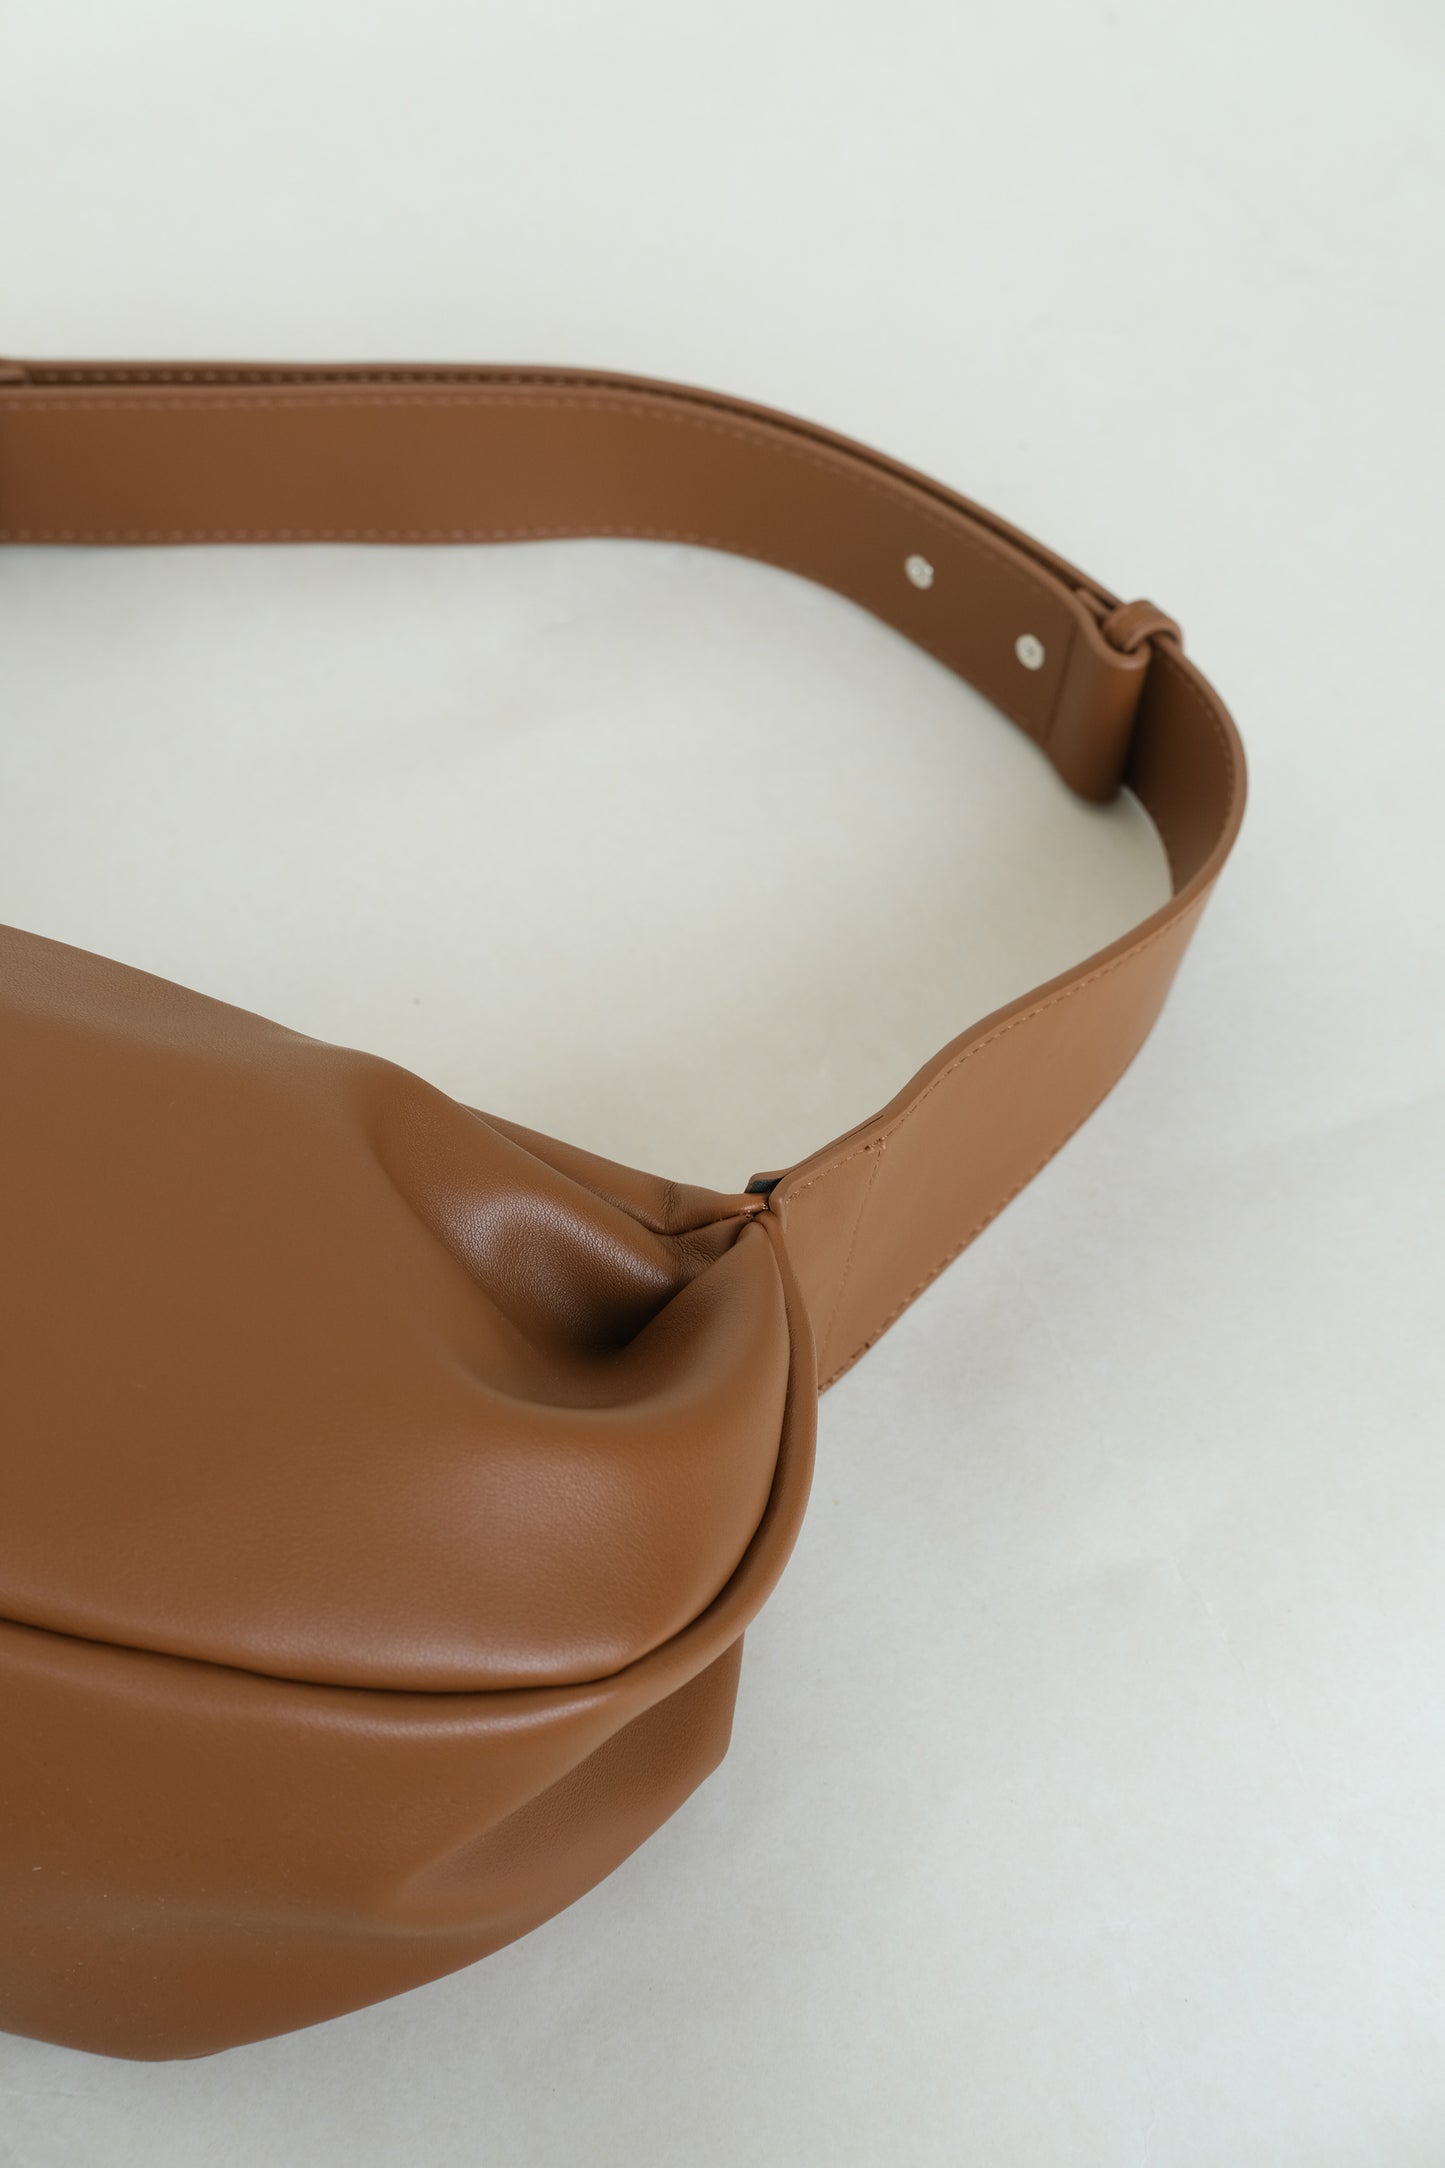 PU soft leather pillow bag in brown